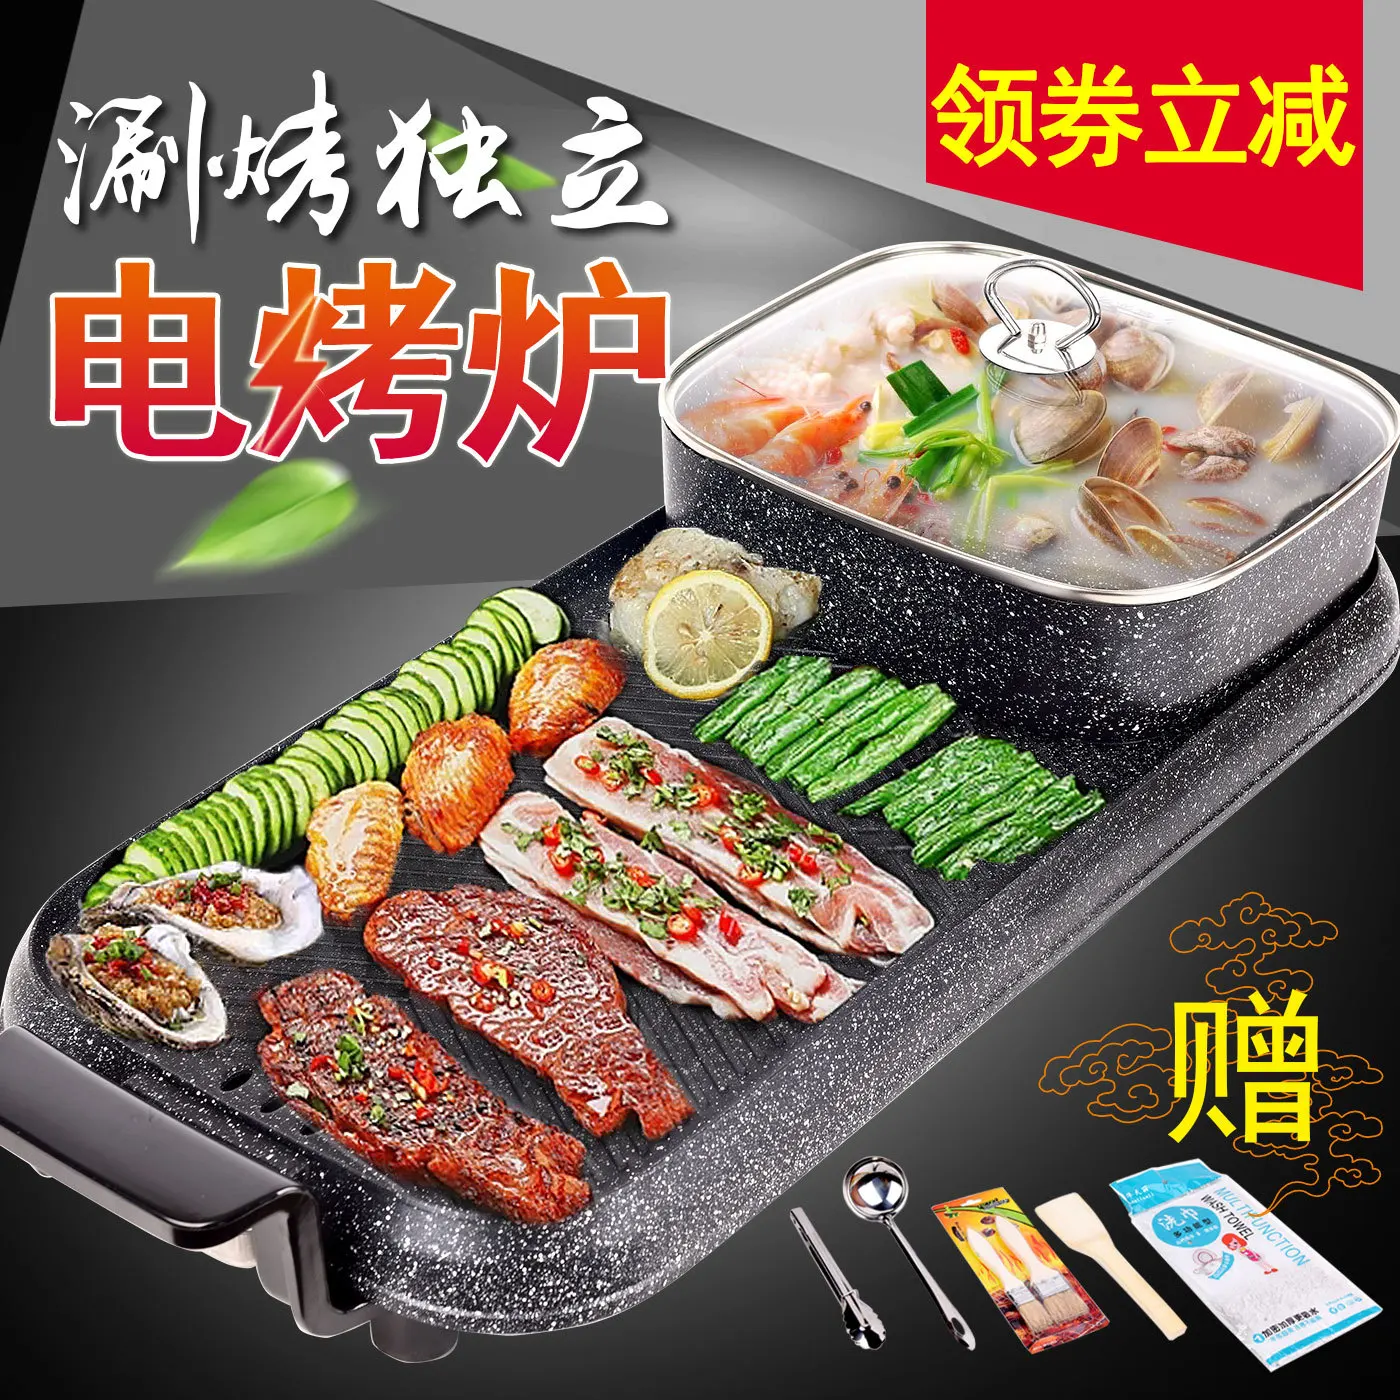 

Korean household non-smoking baking pot electric oven non stick barbecue grill BBQ charbroiler stove hot pot roasting meat pan